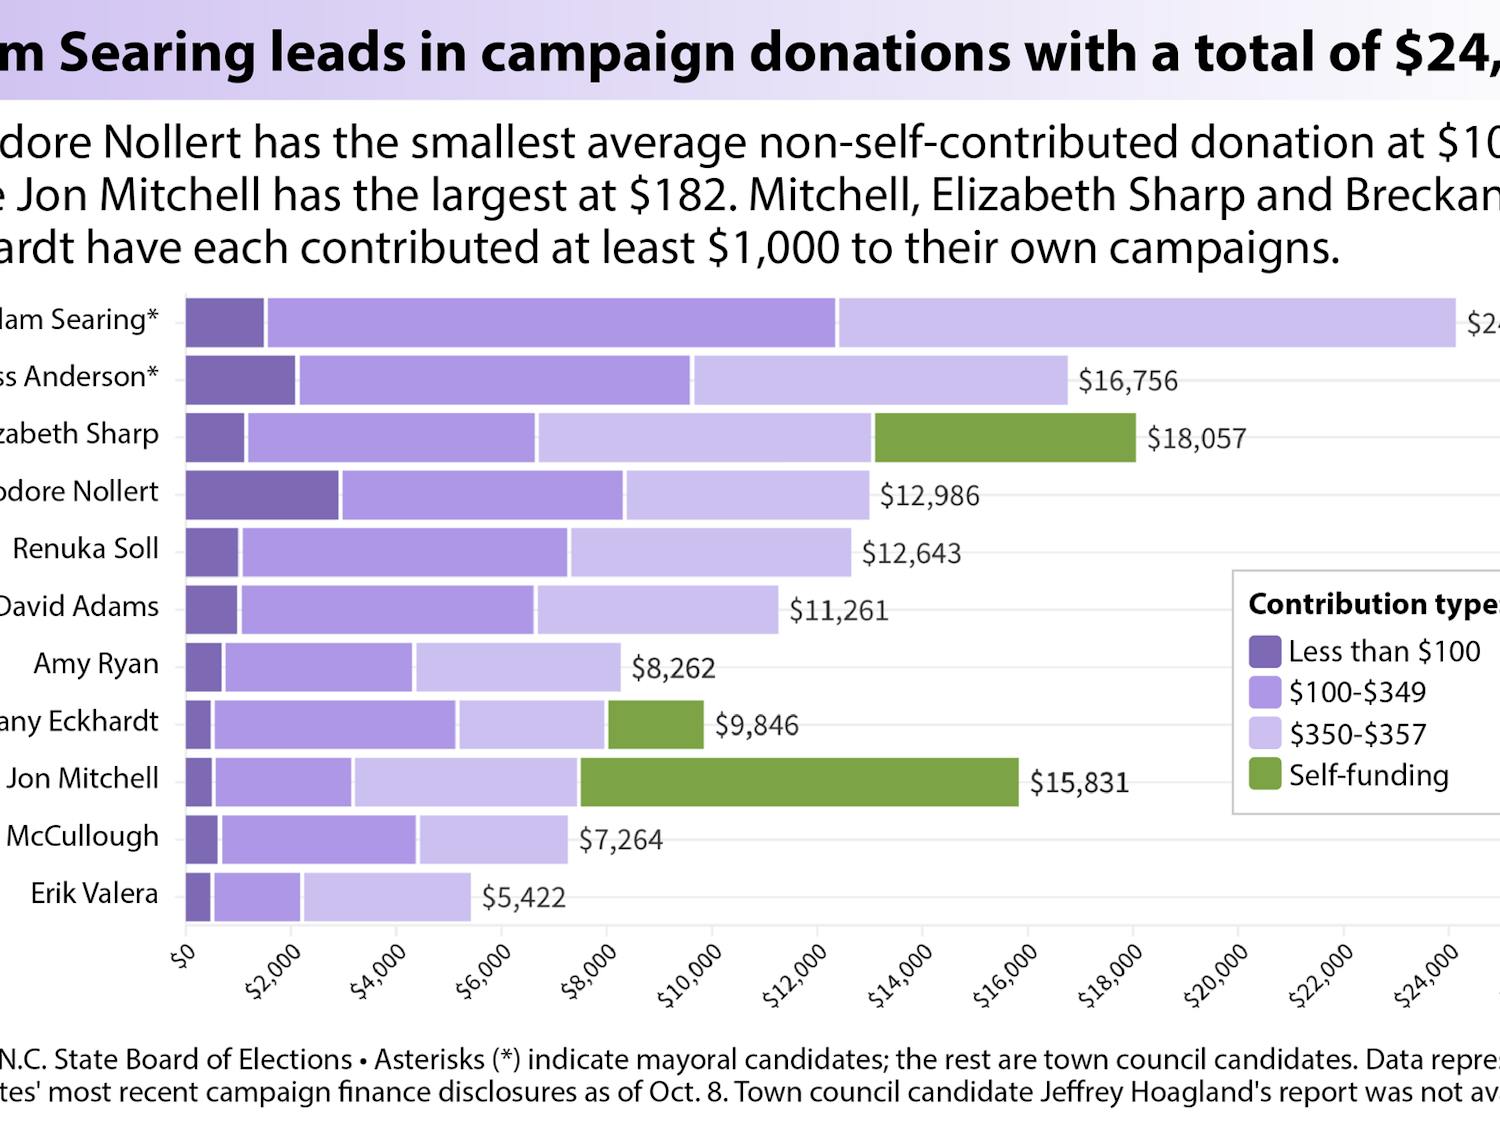 Visualization: Adam Searing leads in campaign donations with a total of $24,138